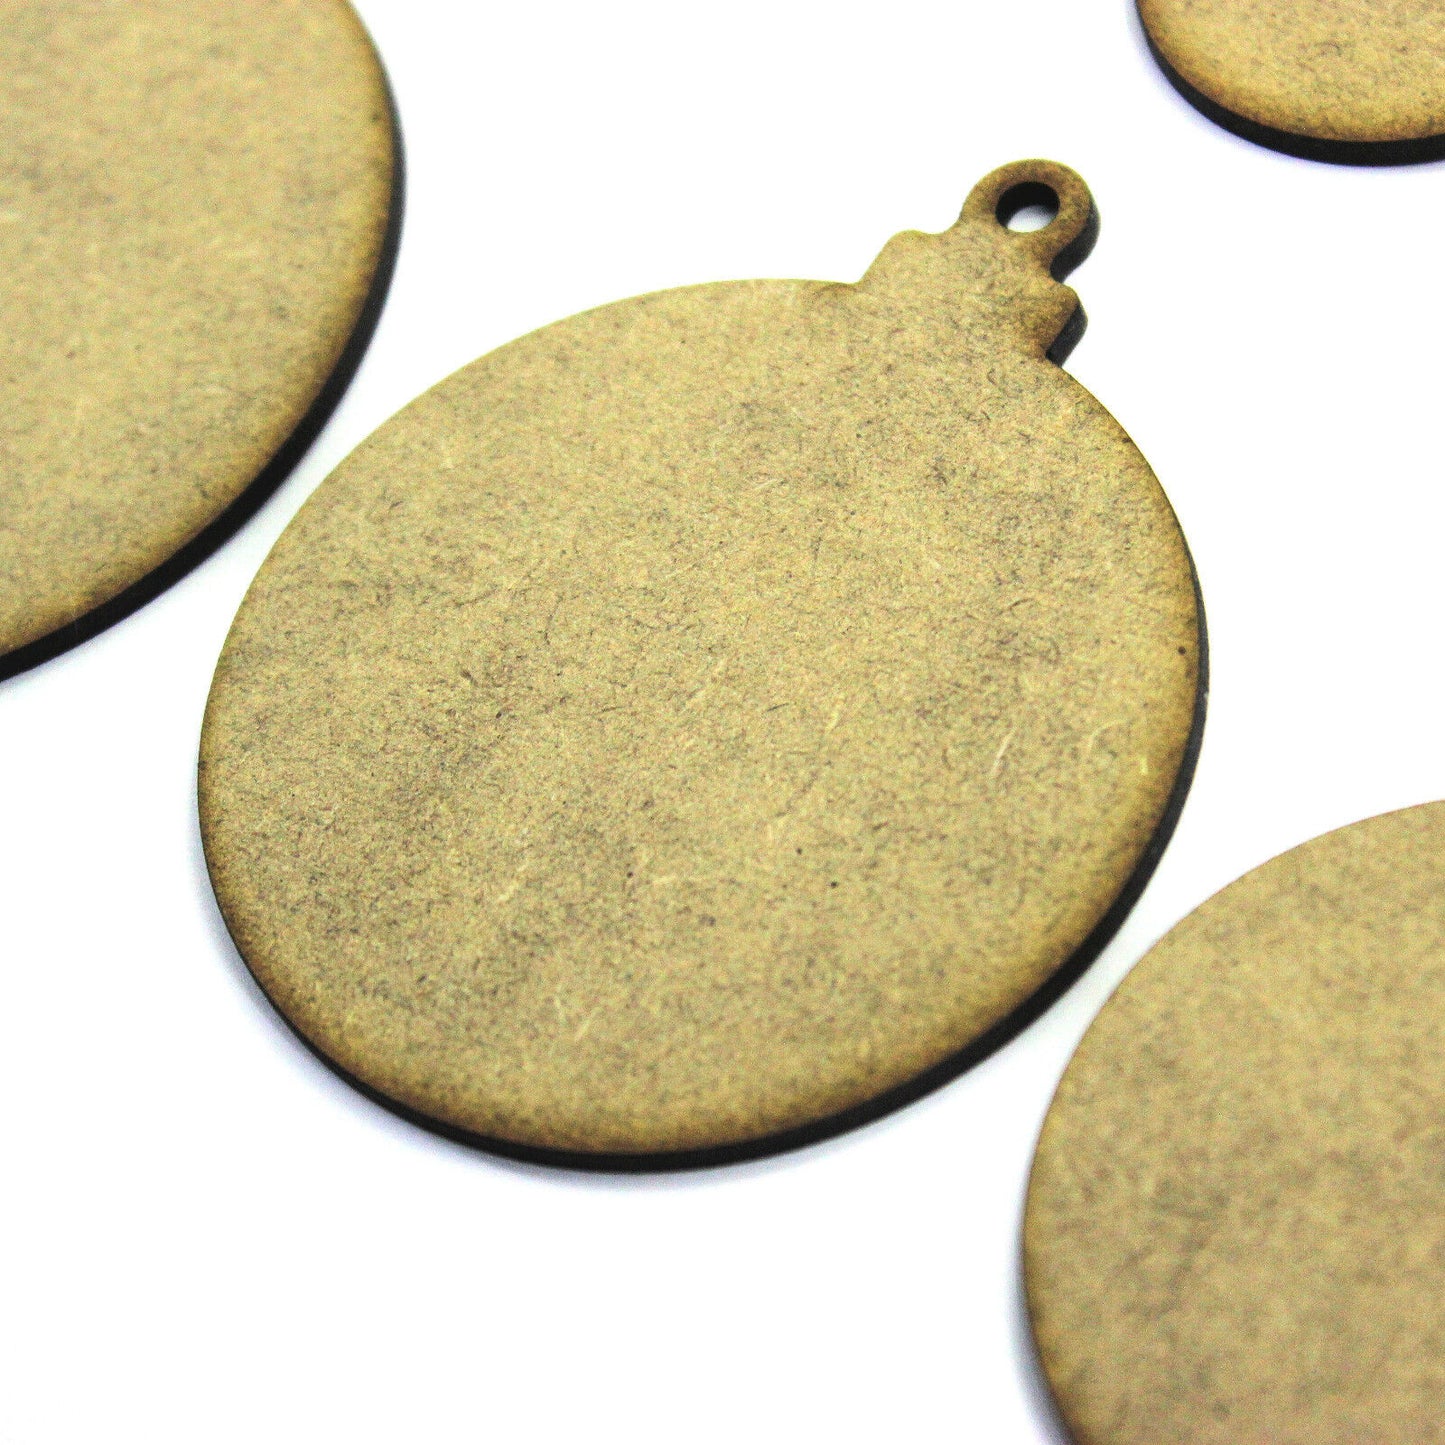 Christmas Bauble Craft Shape, Various Sizes. Tags,Tree Decorations.2mm MDF Wood